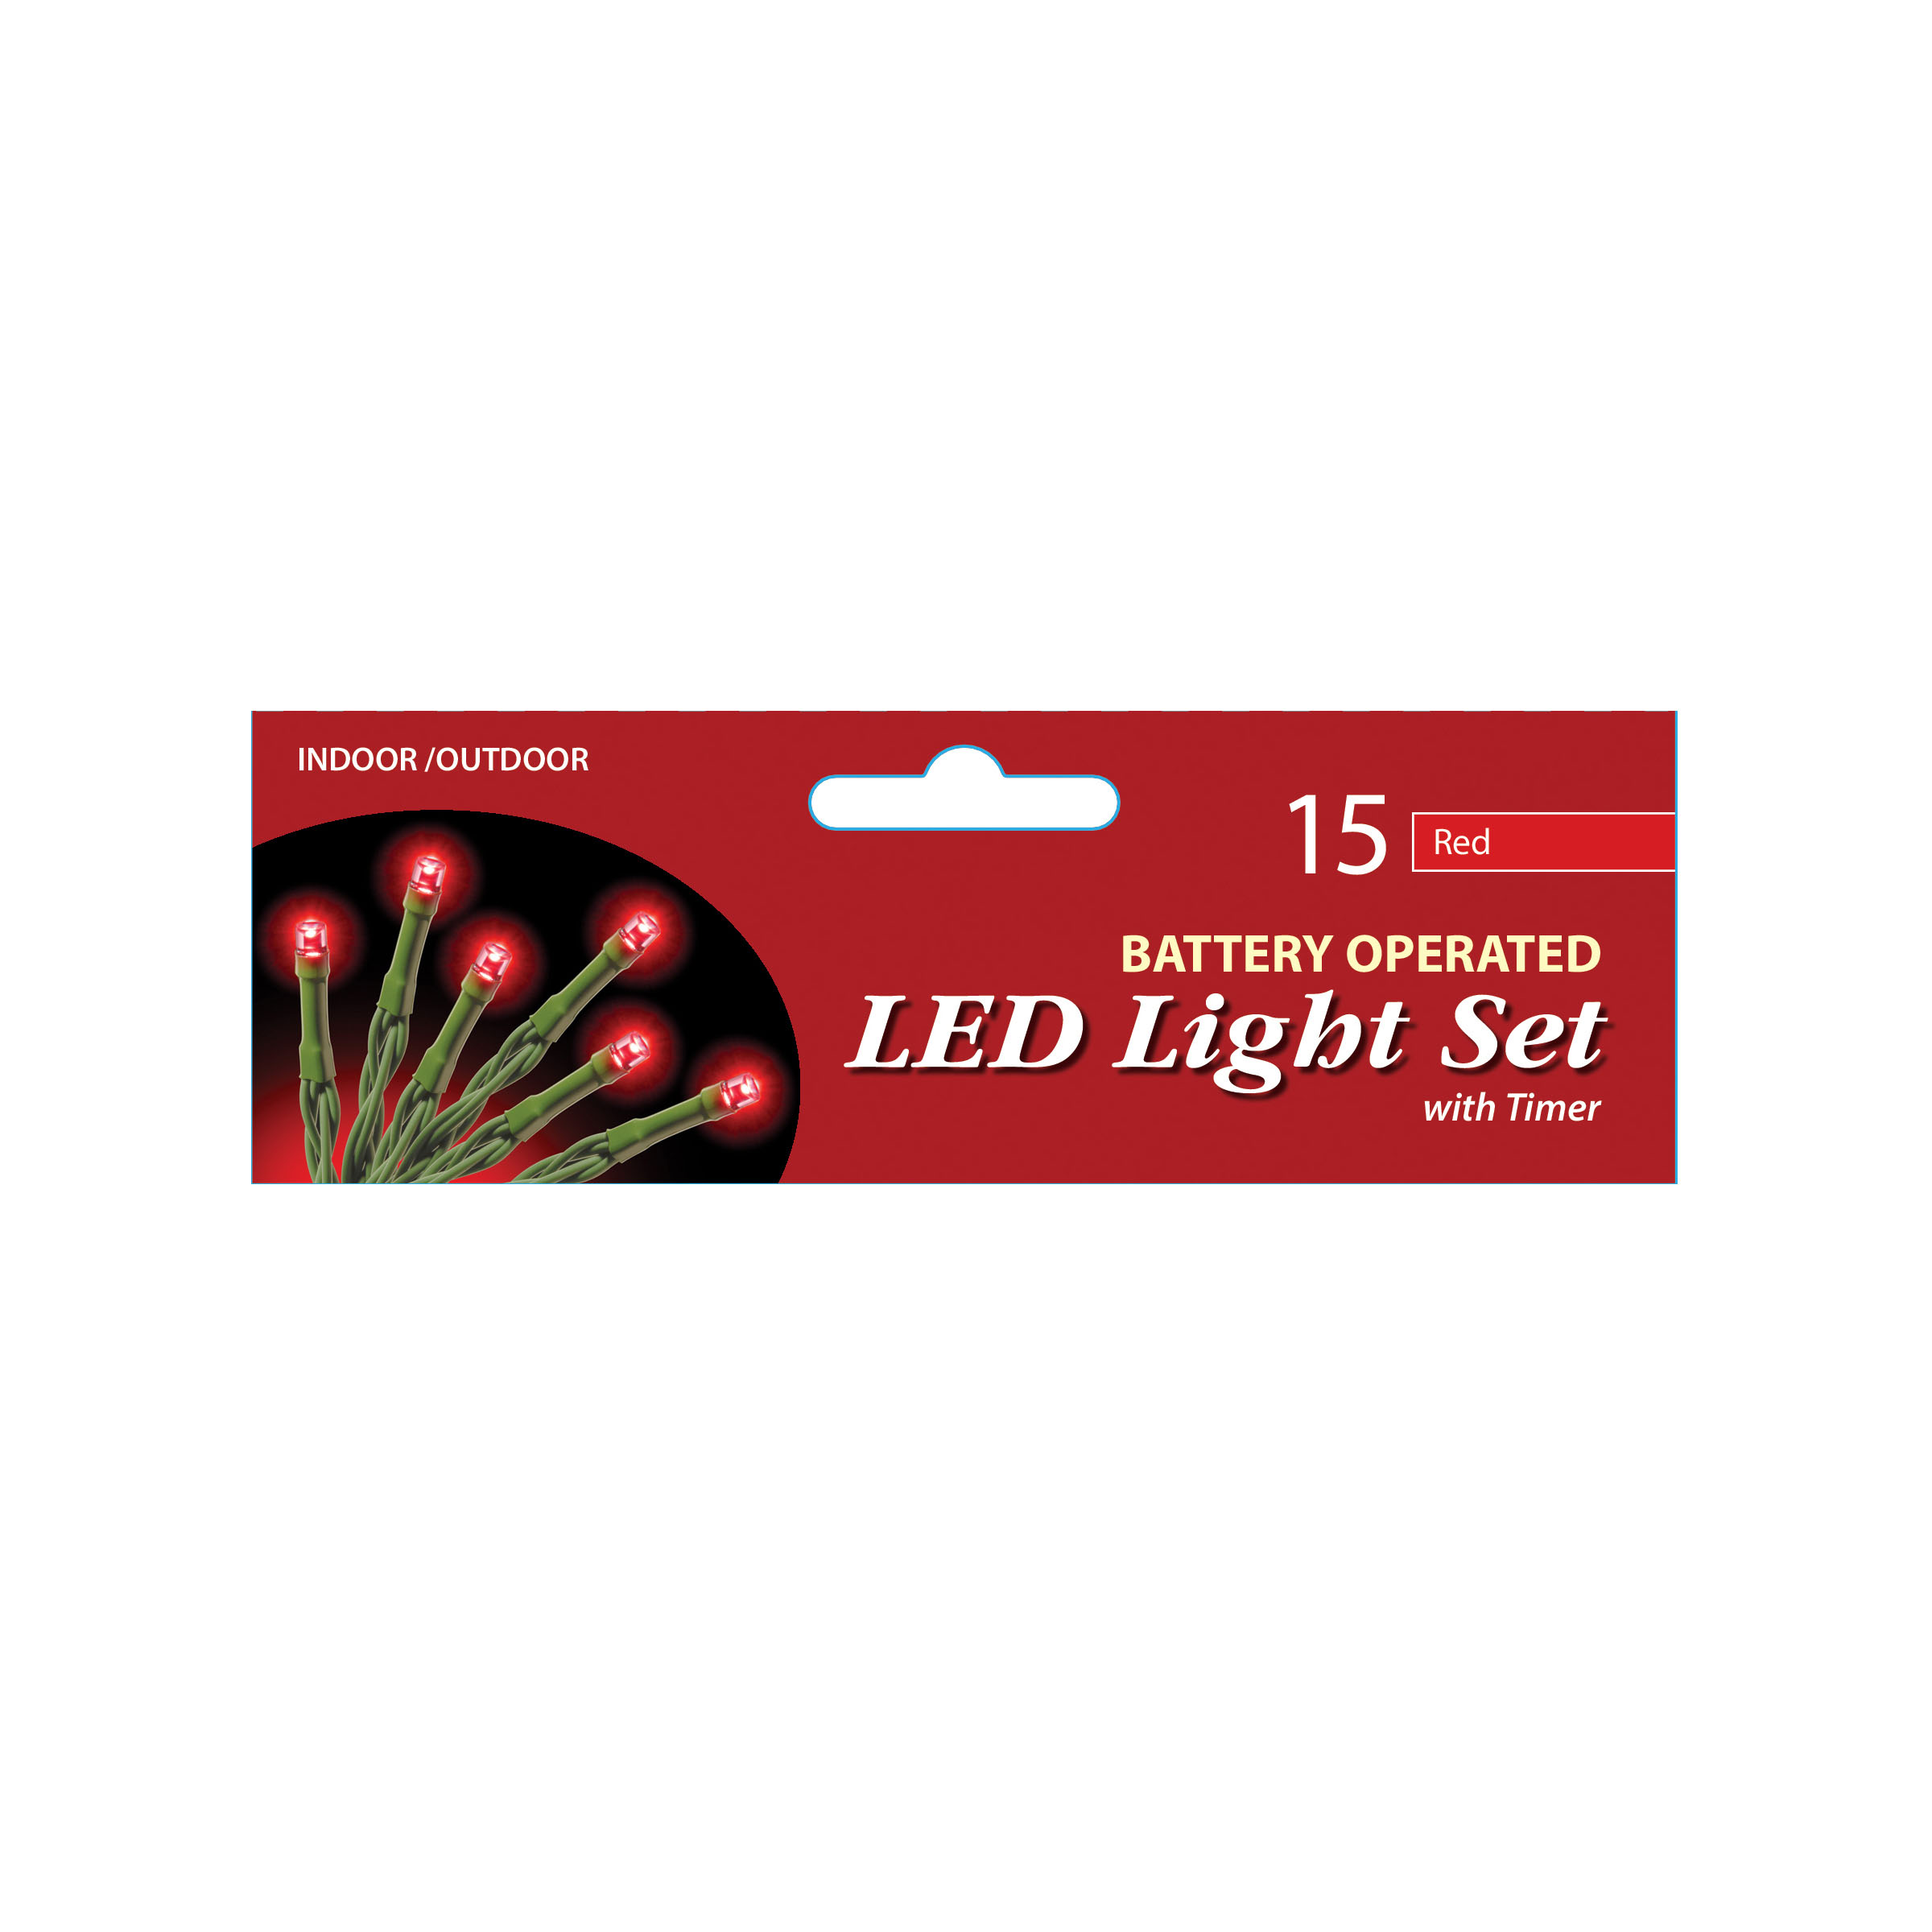 15 Bulb Battery Operated Led Lights Set: Red